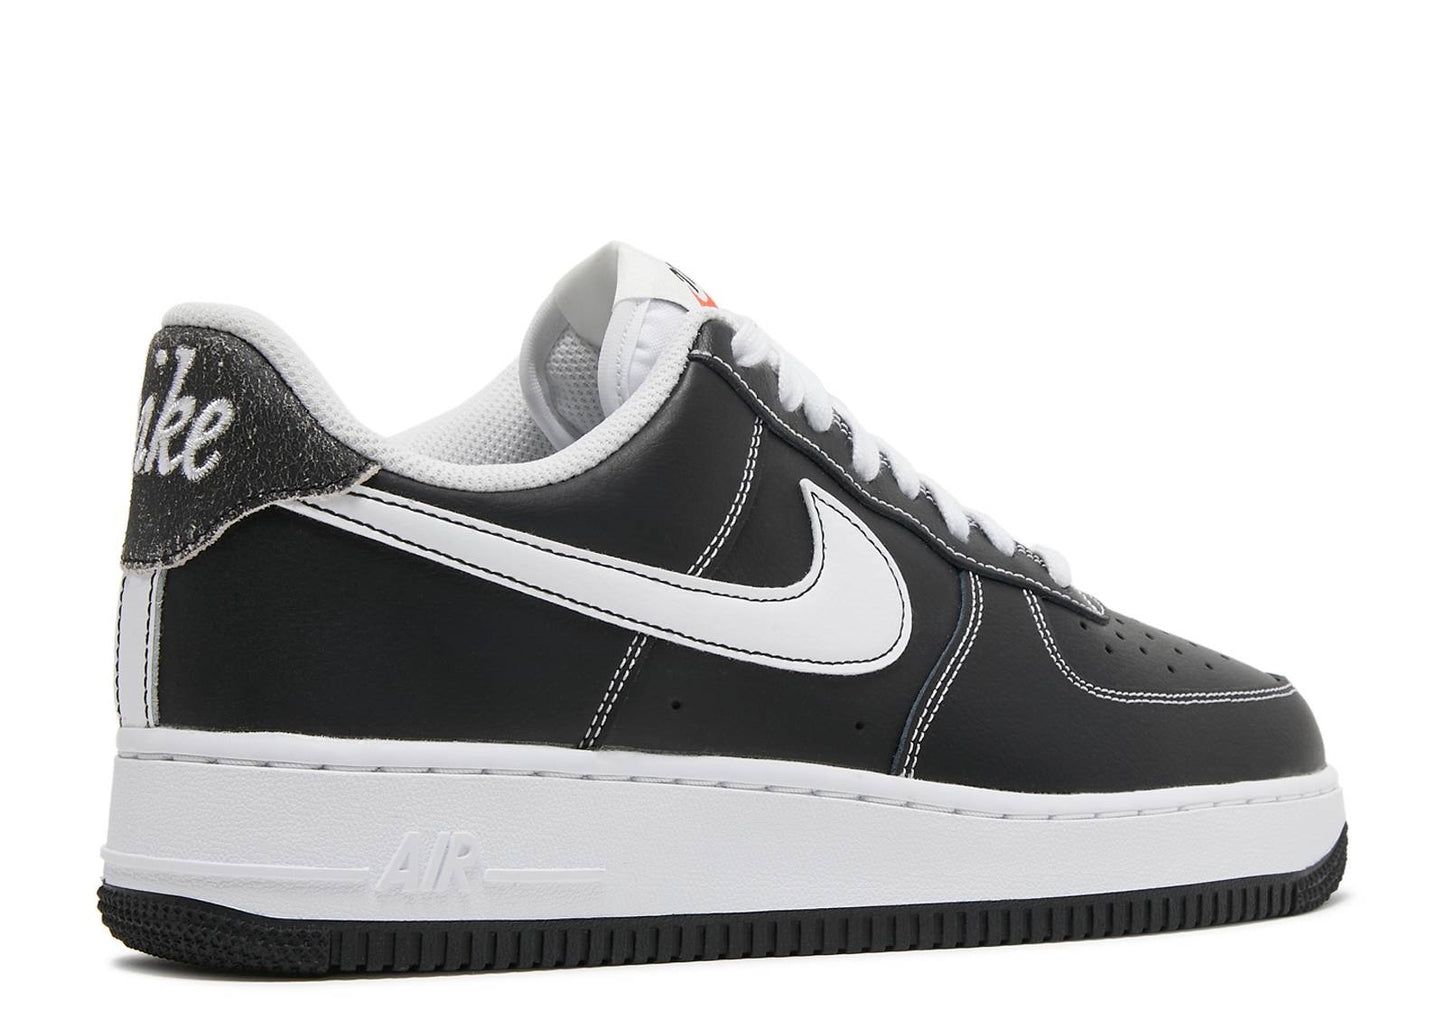 Nike Air Force 1 Low First Use "Black/White"